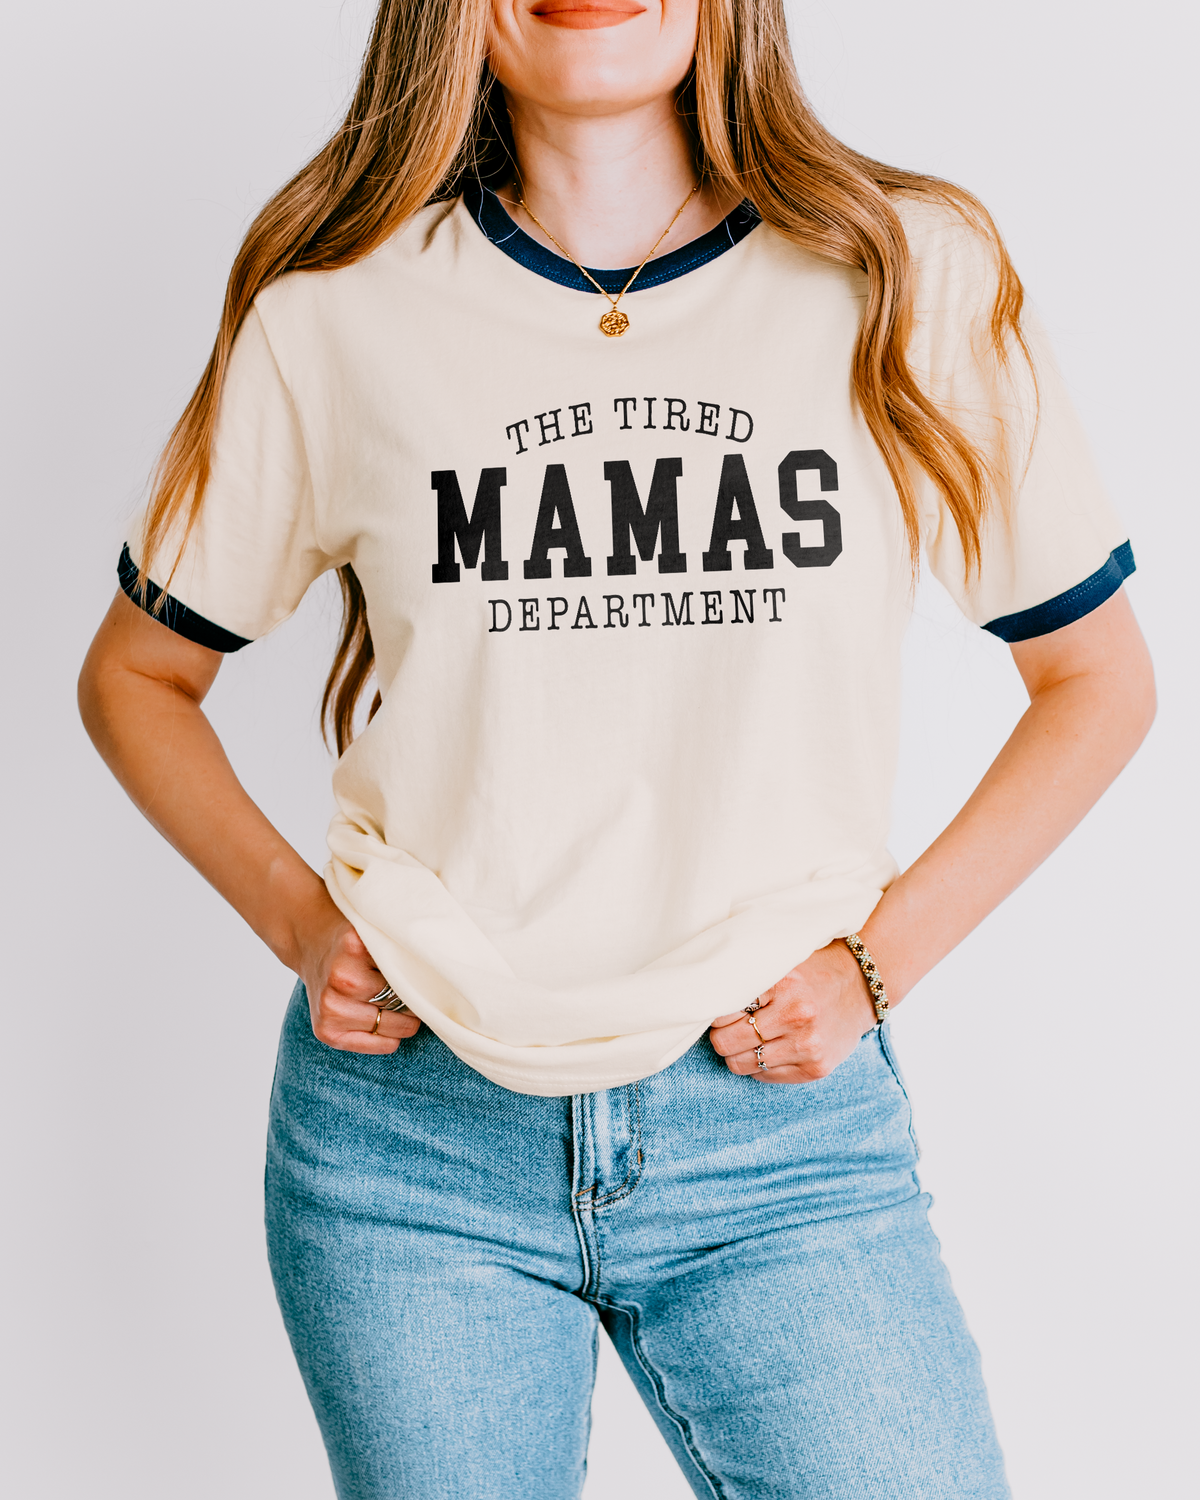 The Tired Mamas Department Next Level Unisex Cotton Ringer T-Shirt